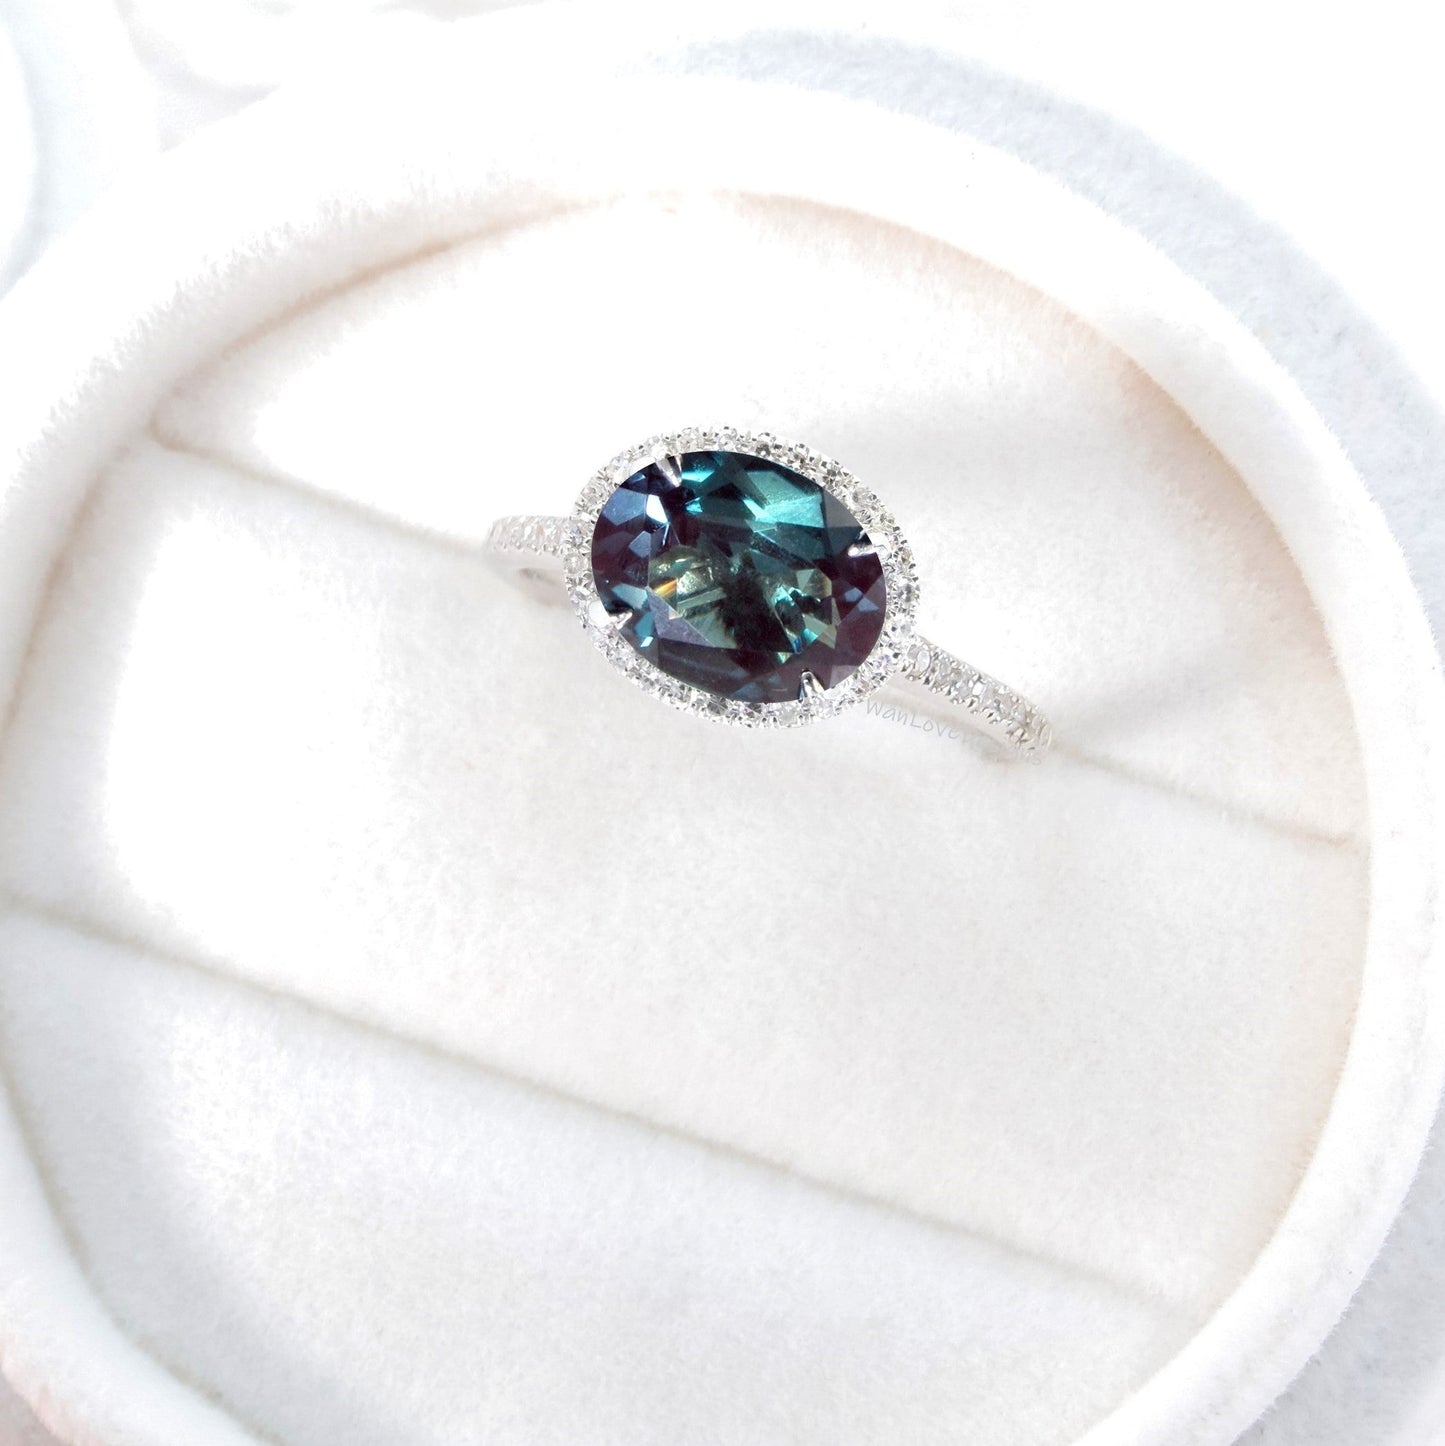 East West Alexandrite Oval halo engagement ring white gold Unique halo engagement ring art deco Oval Diamond halo wedding Bridal promise ring Wan Love Designs